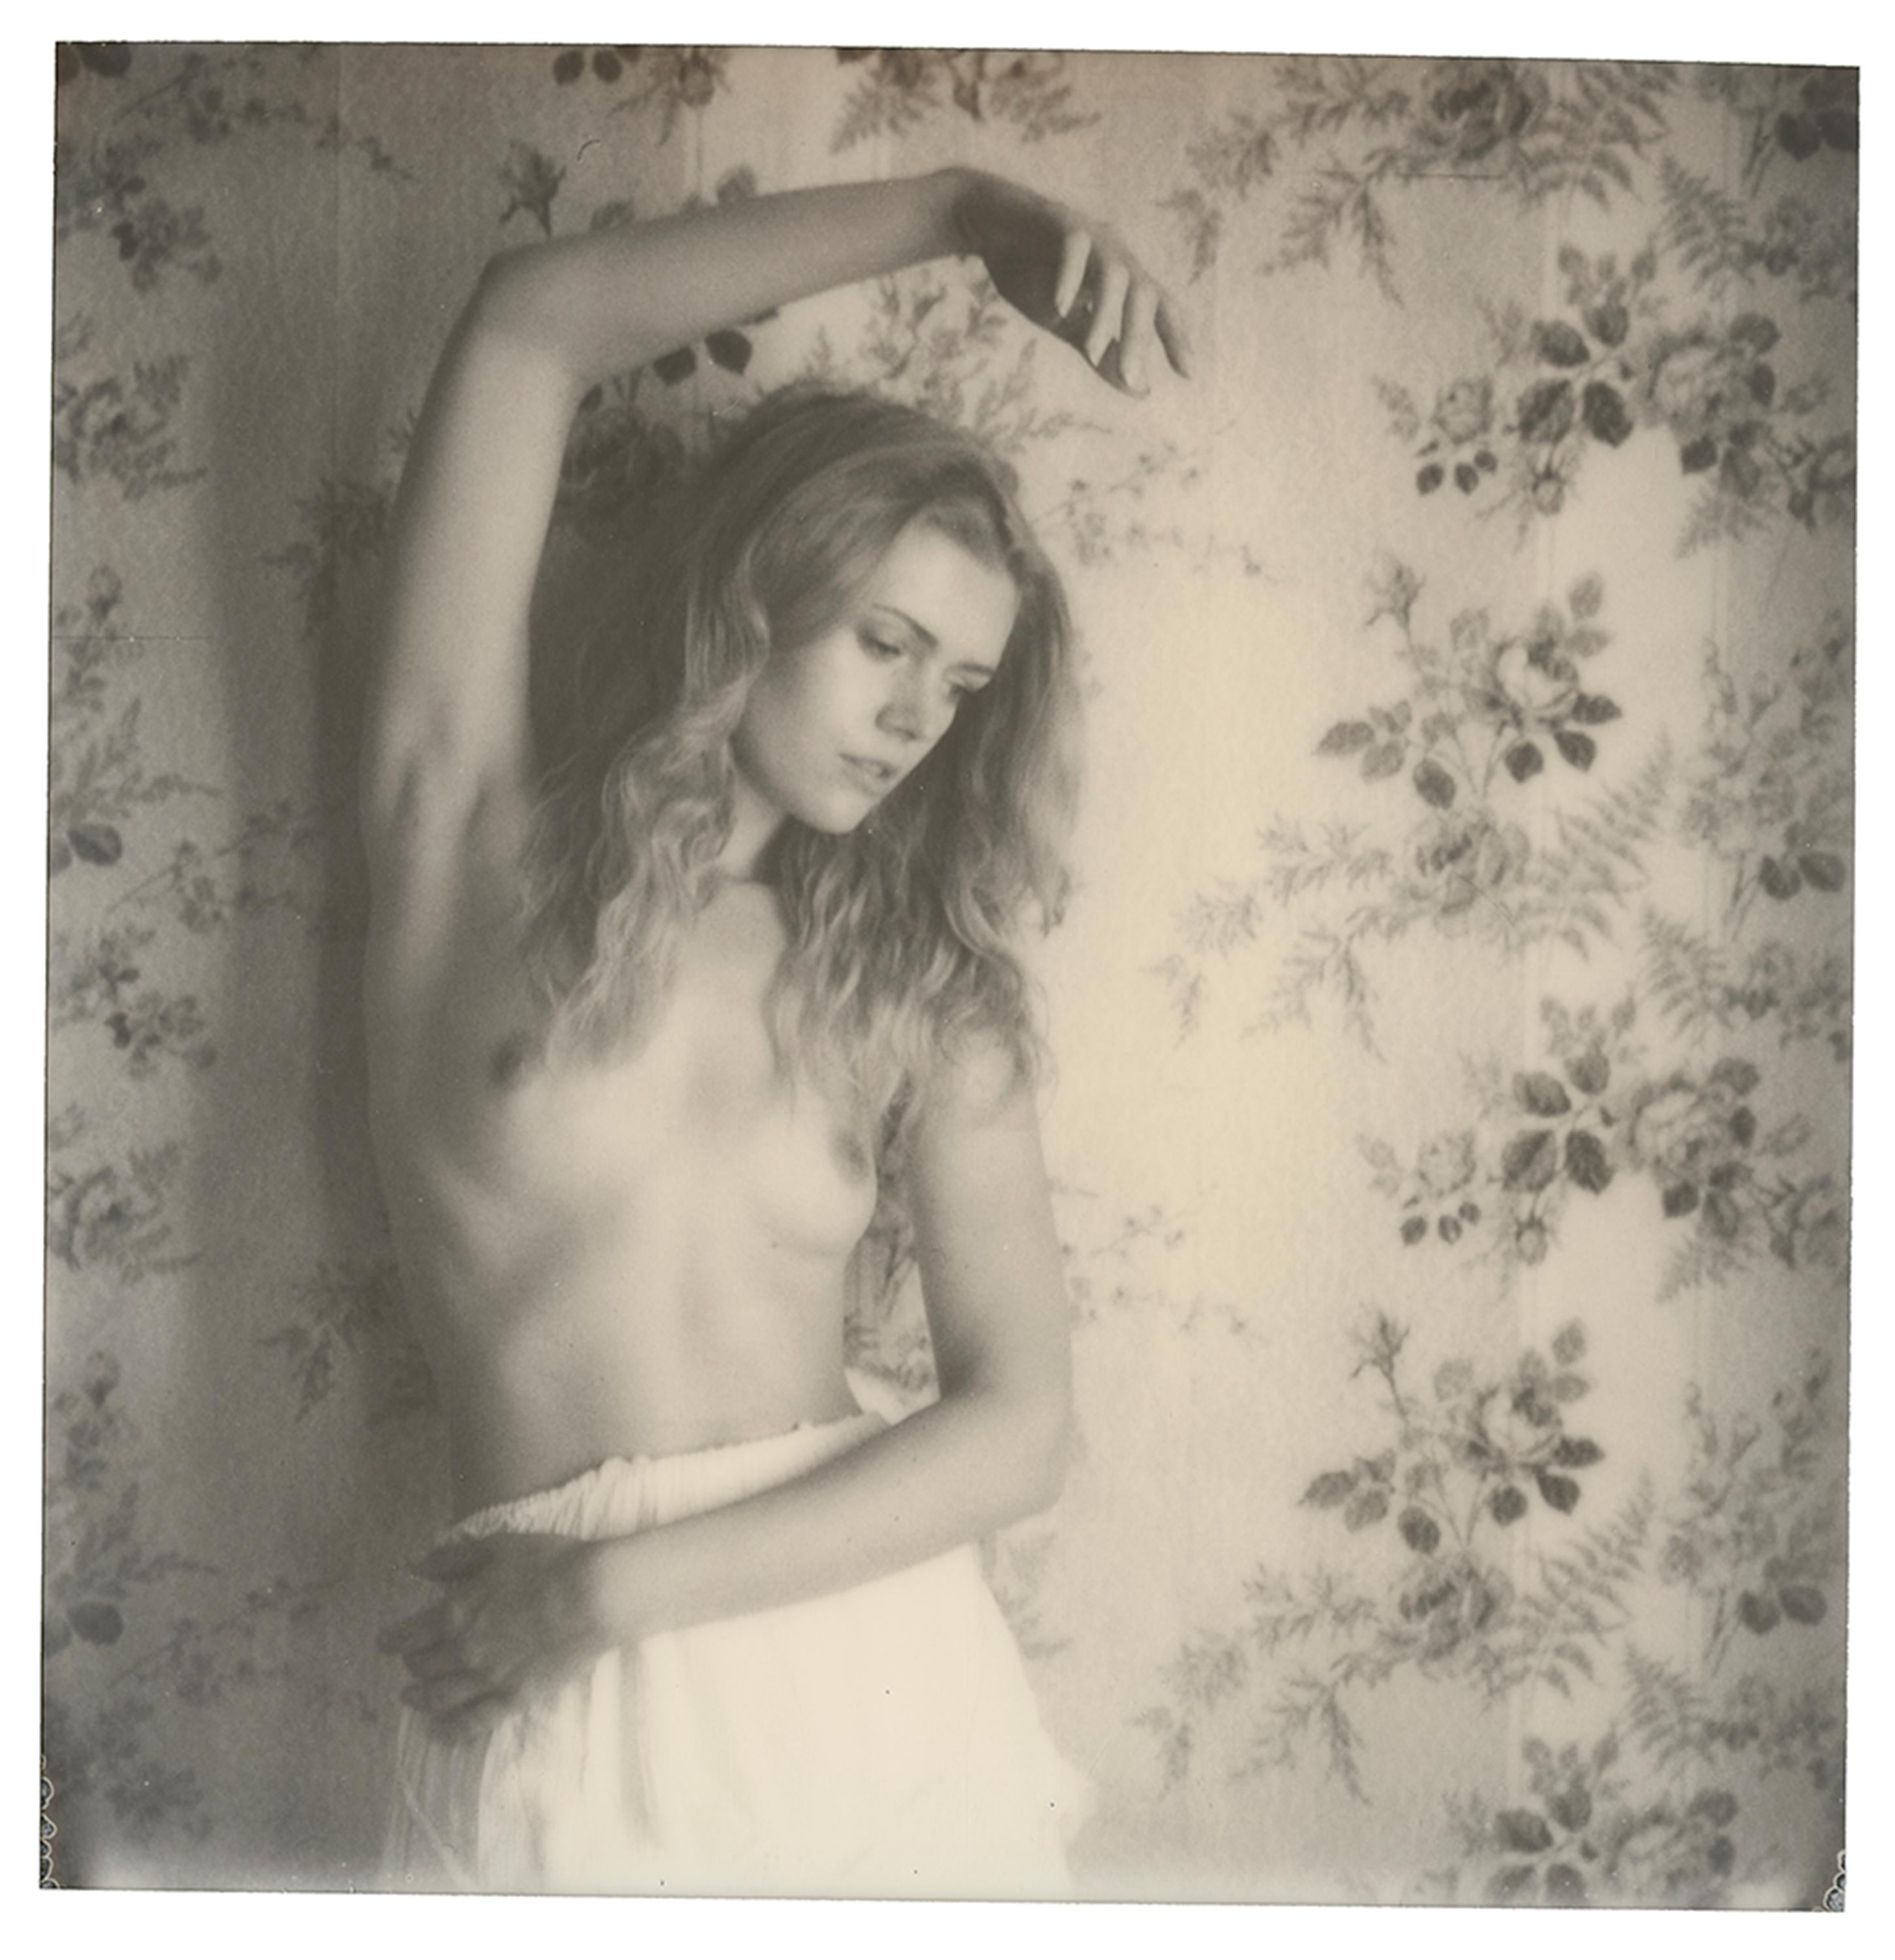 Sven van Driessche Color Photograph - Moving is Kate - Contemporary, 21st Century, Polaroid, Nude Photograph